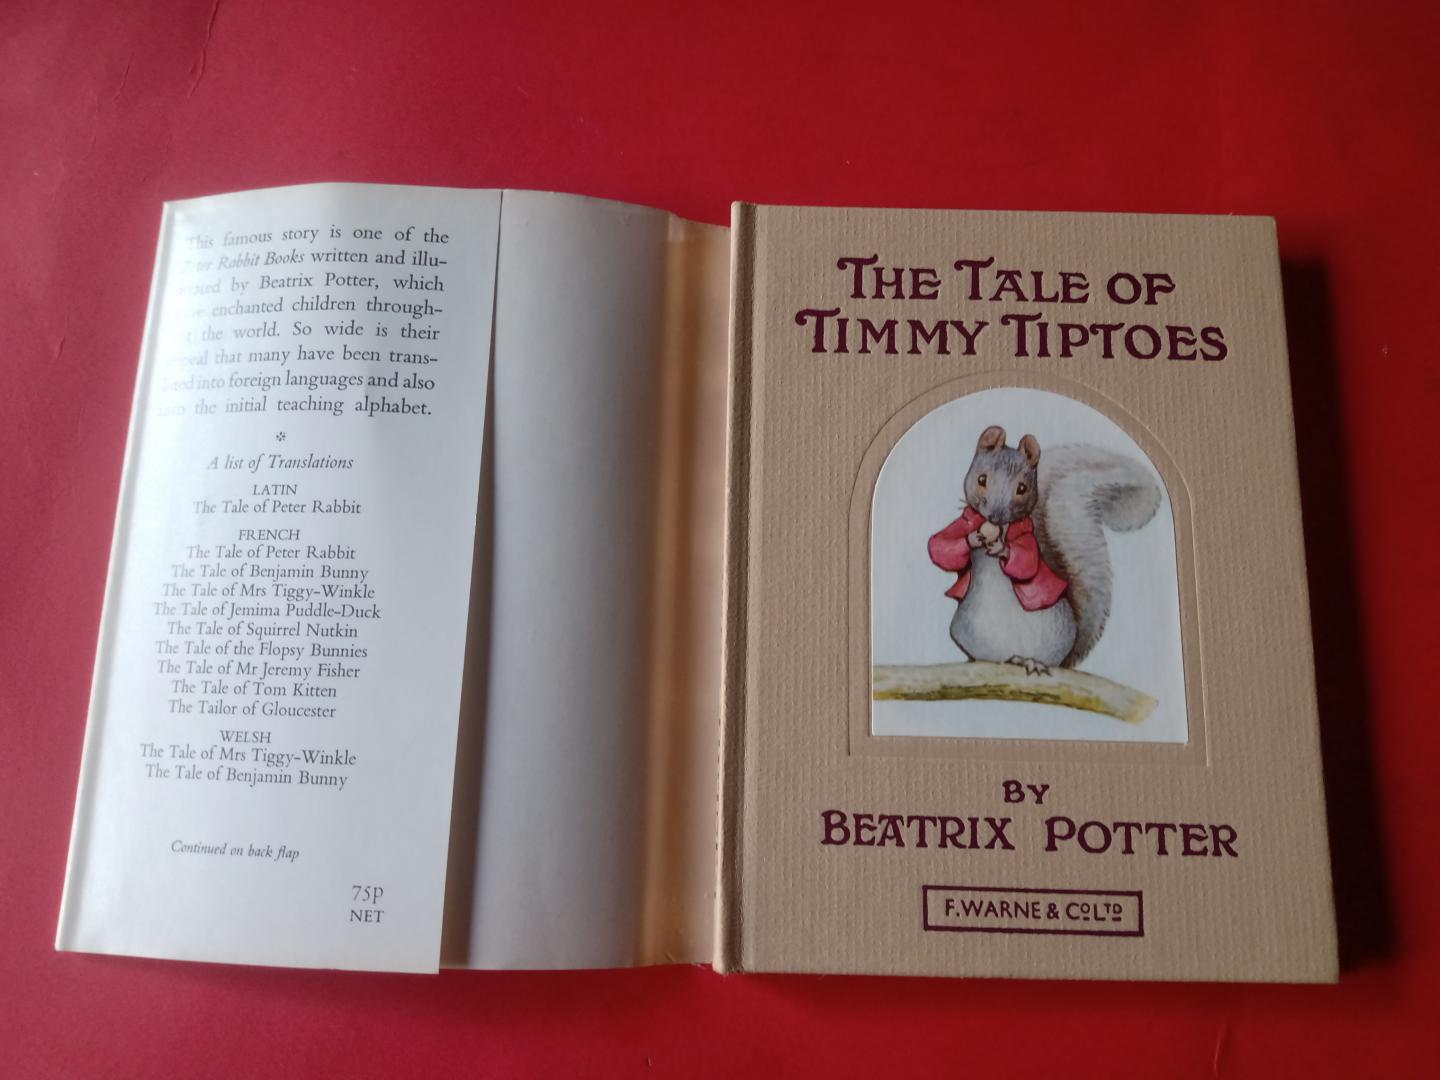 Beatrix Potter, ( nr 12 ) - The Tale of Timmy Tiptoes